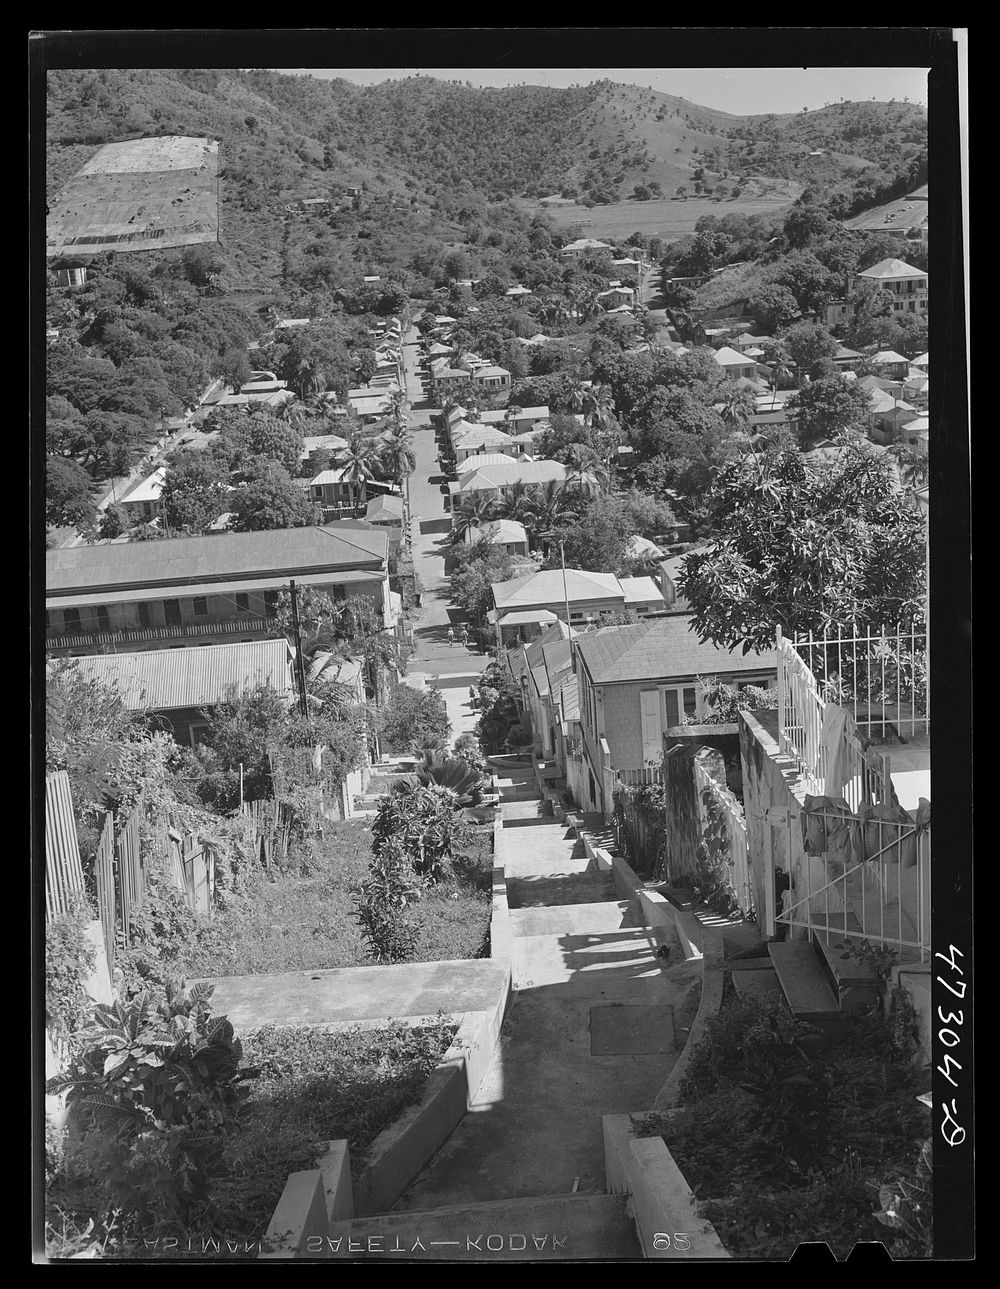 [Untitled photo, possibly related to: Charlotte Amalie, Saint Thomas Island, Virgin Islands. One of the steep hillside…